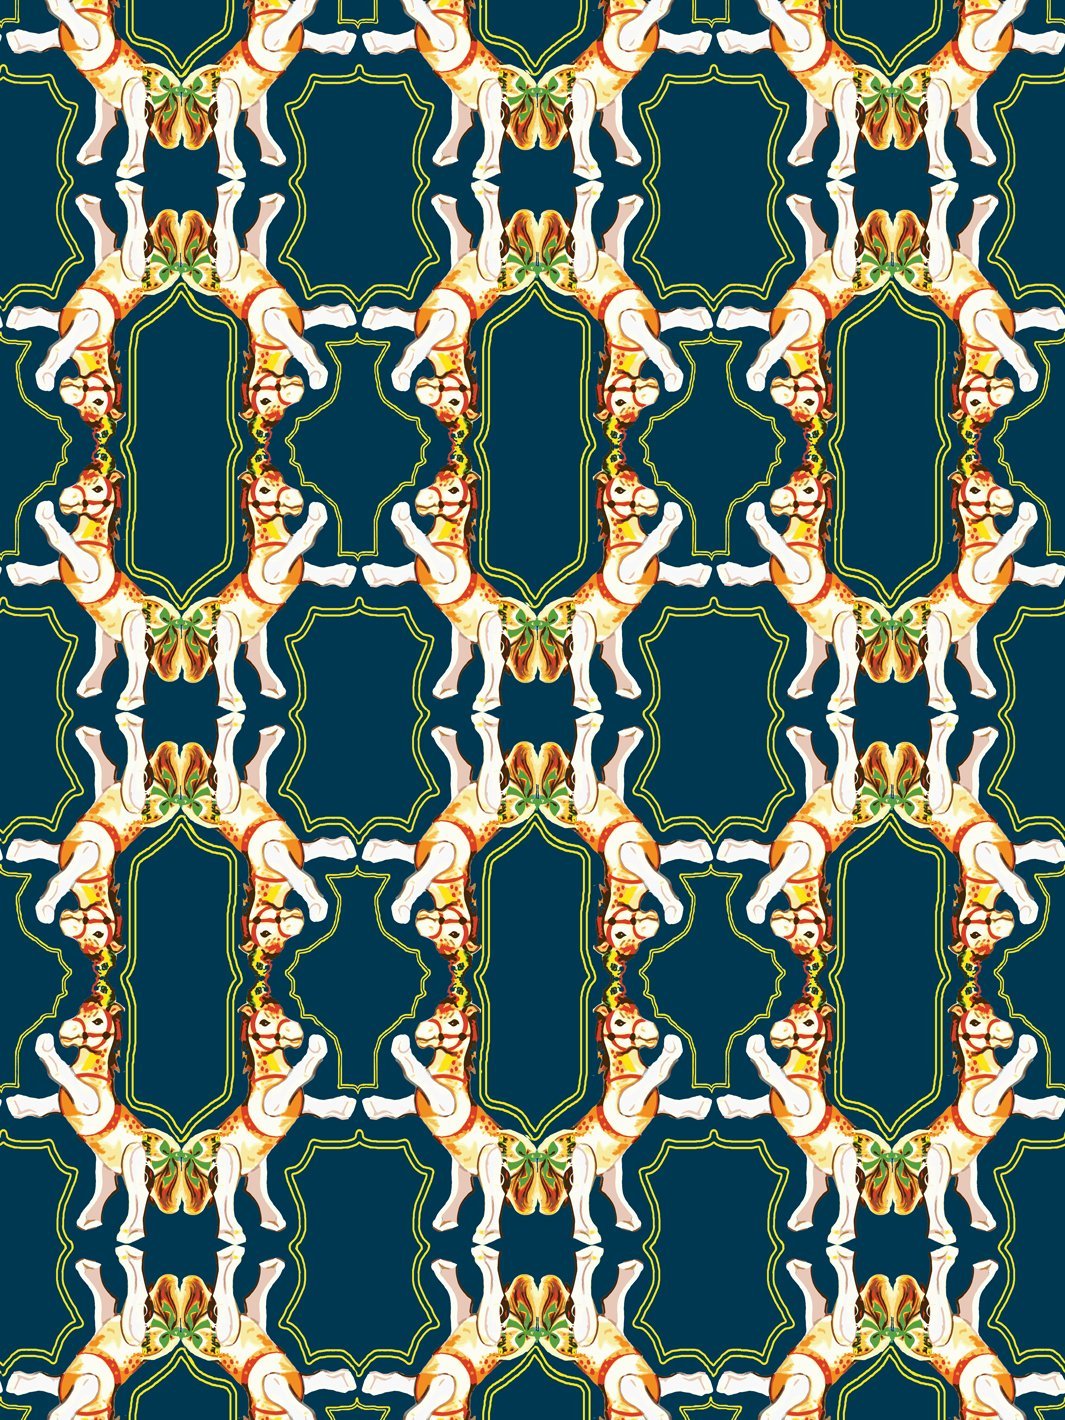 'Horse Arc' Wallpaper by Fisher-Price™ - Navy